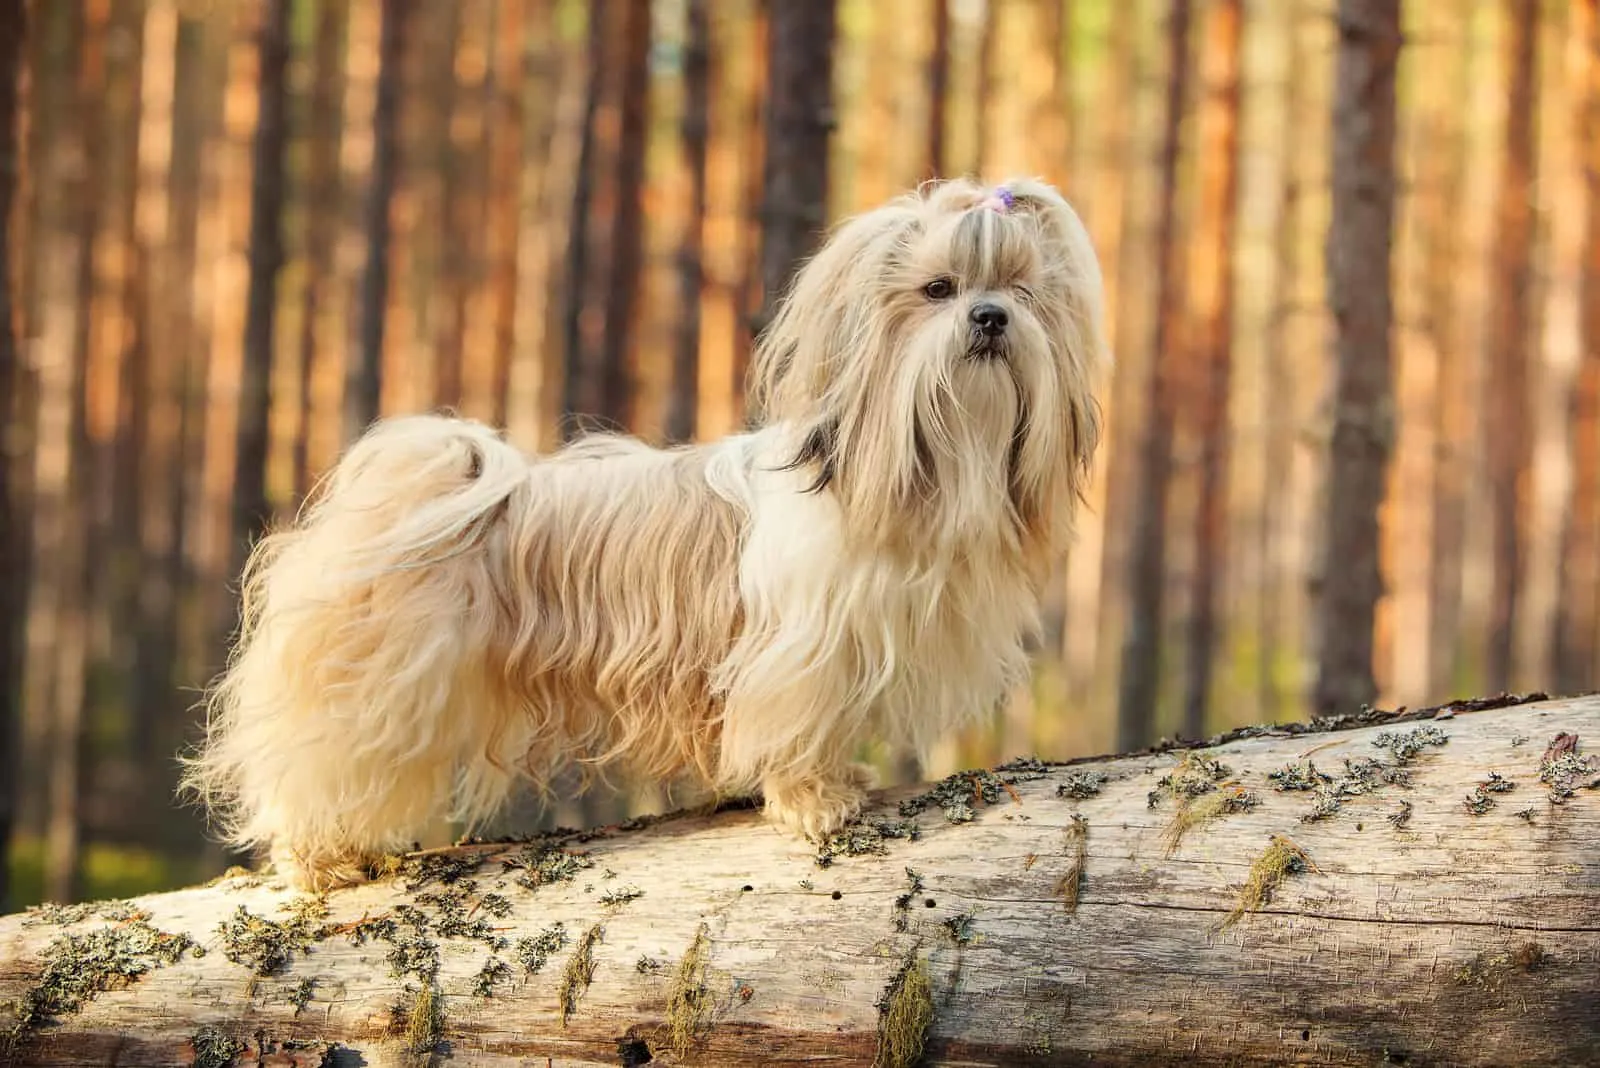 Shih-tzu dog standing on tree trunk in forest